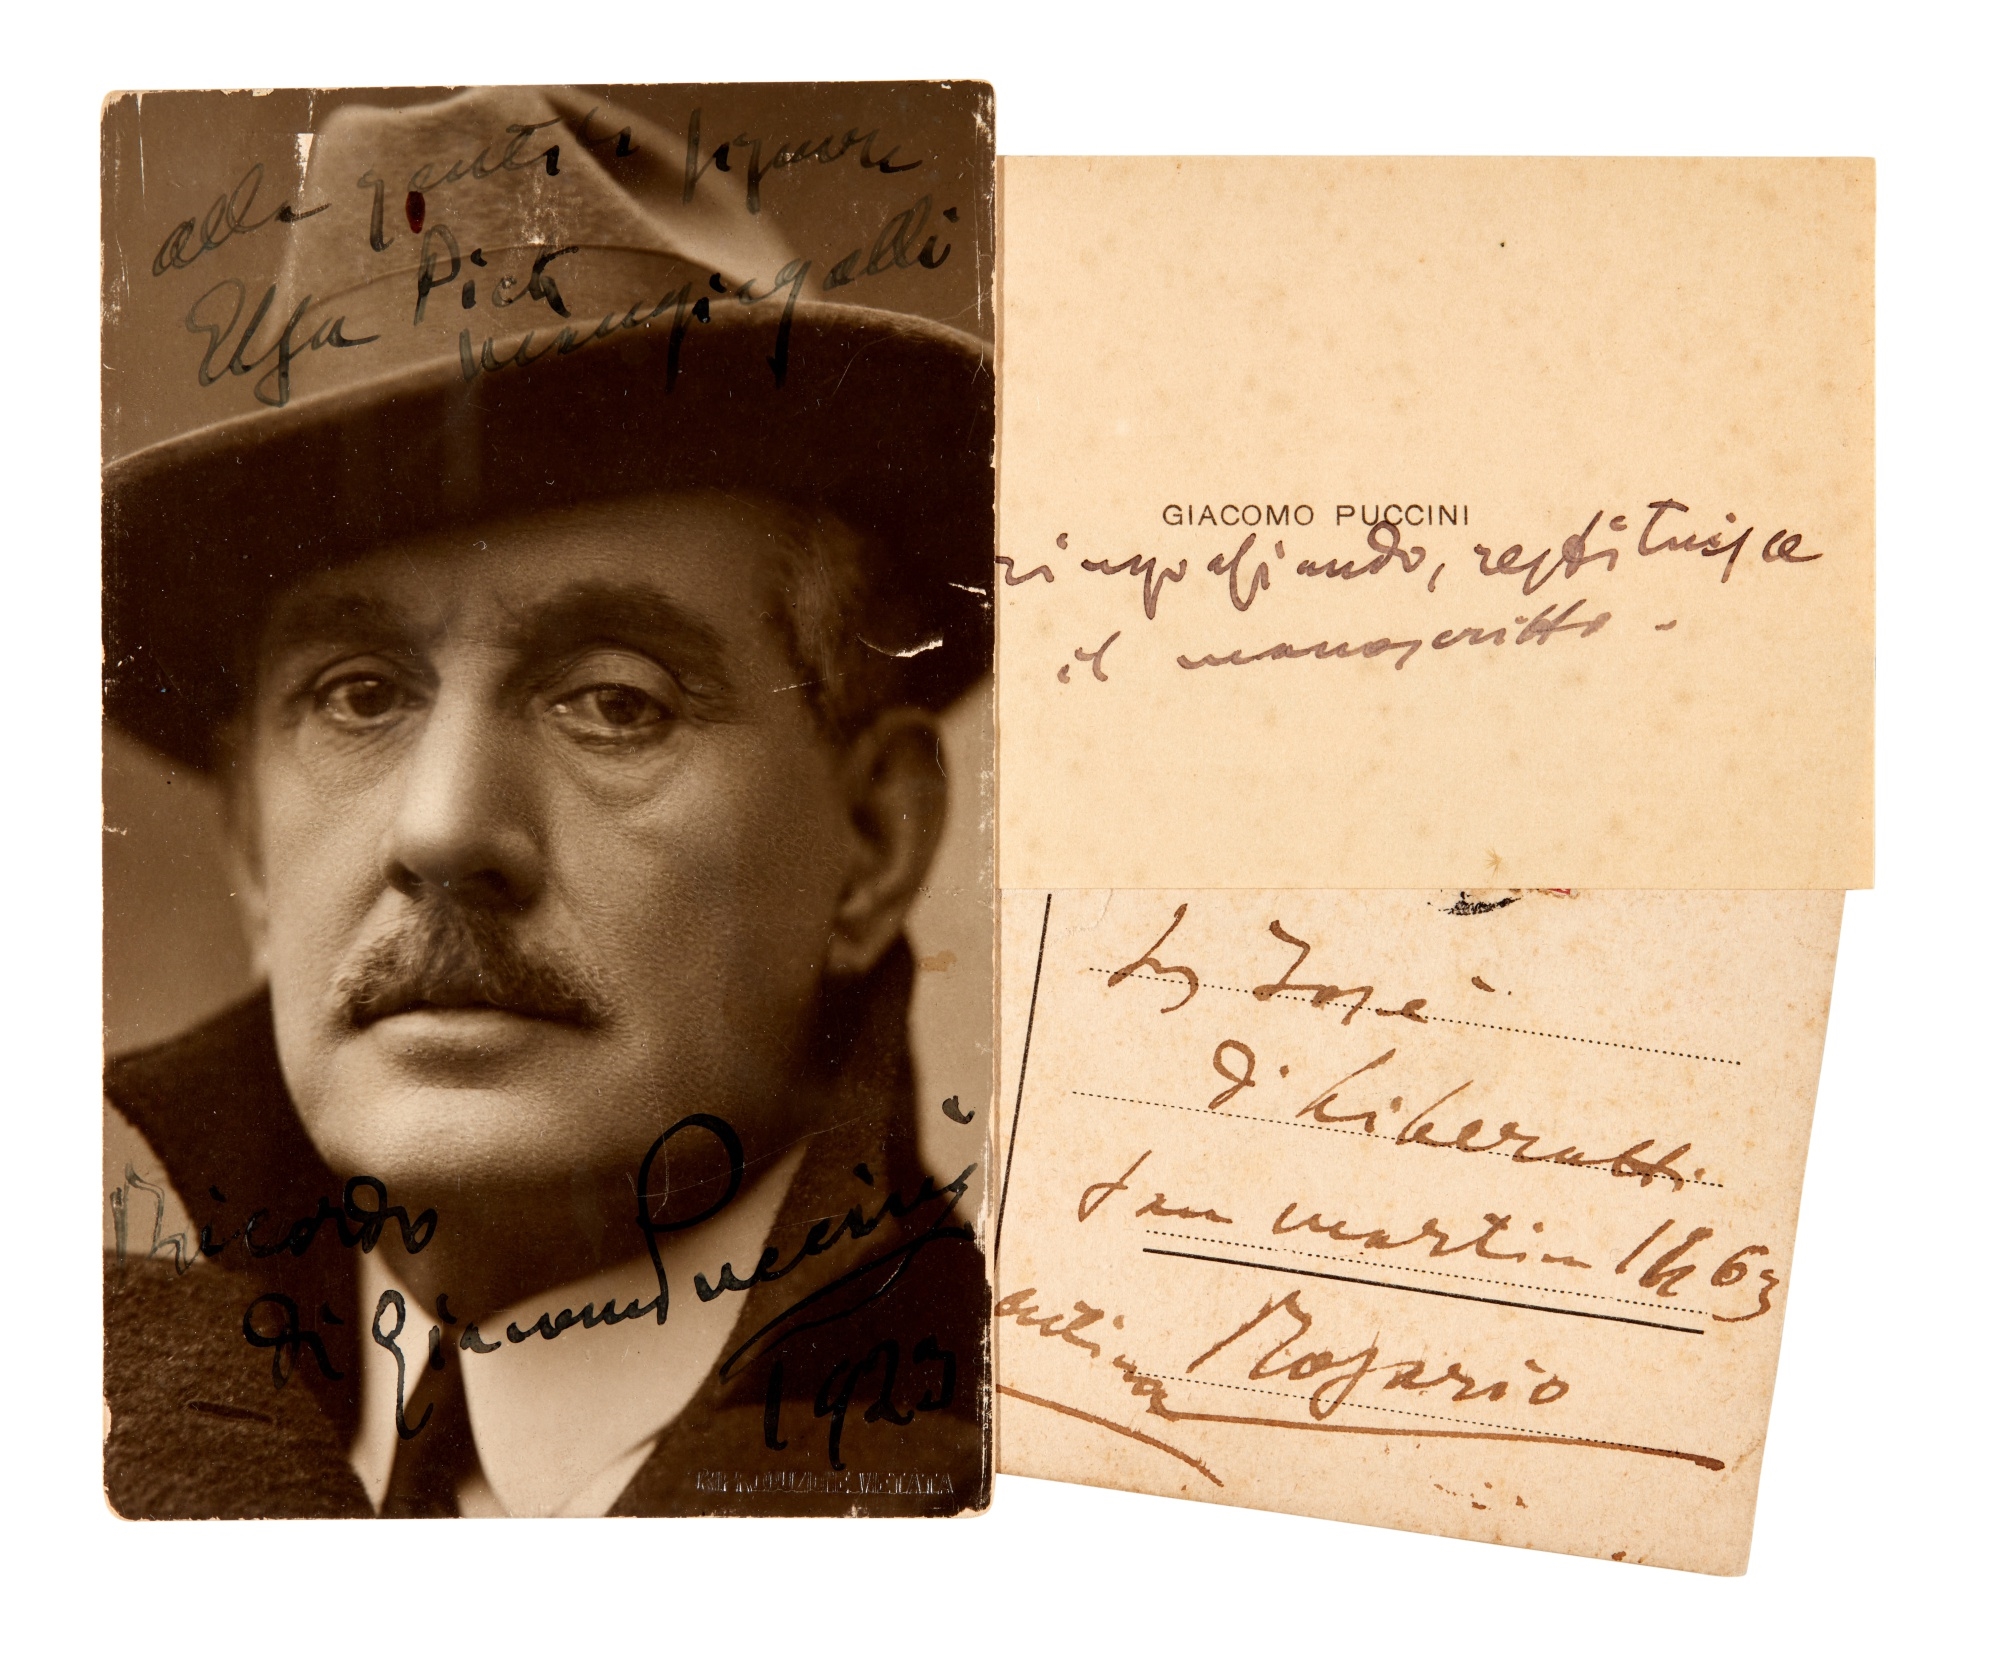 Artwork by Giacomo Puccini, G. Puccini. Photograph signed and inscribed, Made of photograph